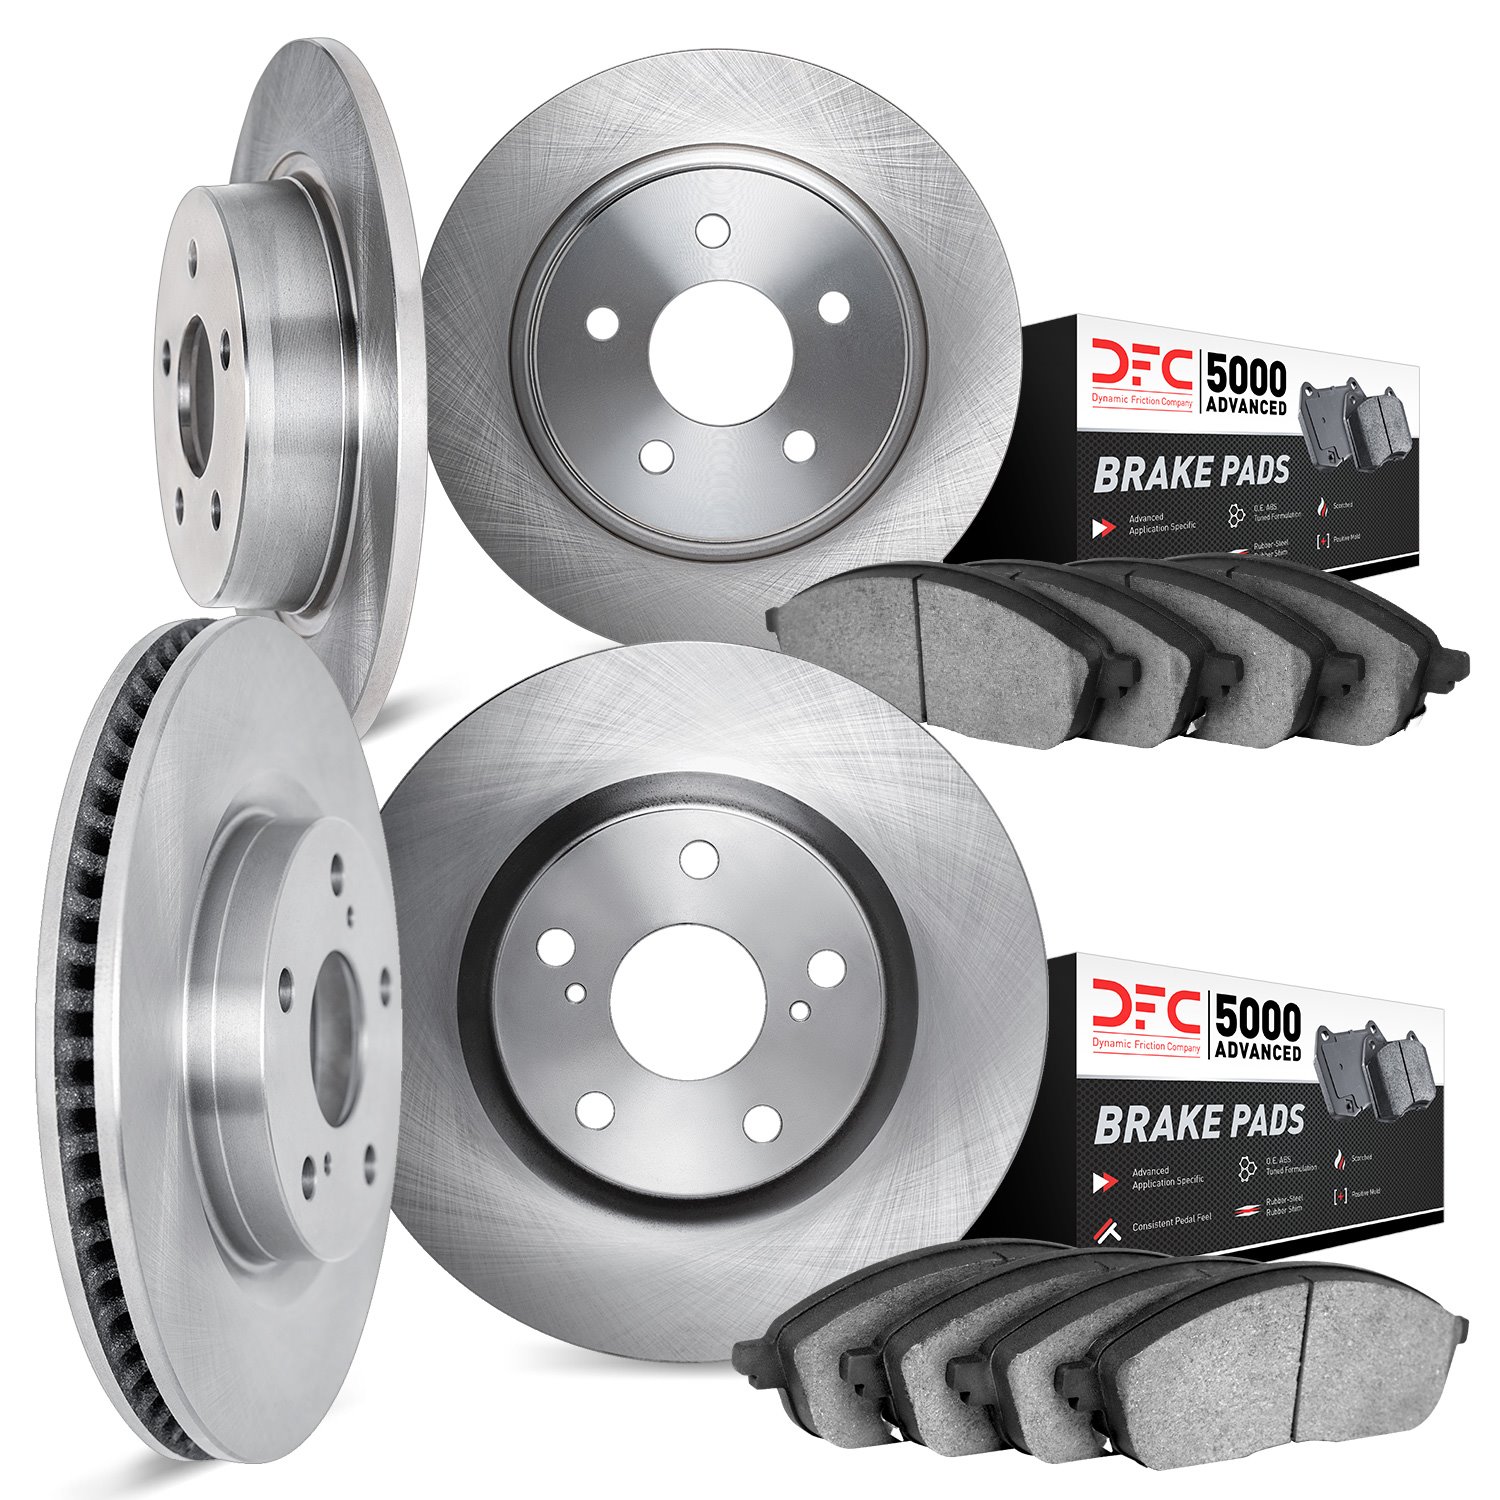 6504-63032 Brake Rotors w/5000 Advanced Brake Pads Kit, 2014-2019 Mercedes-Benz, Position: Front and Rear